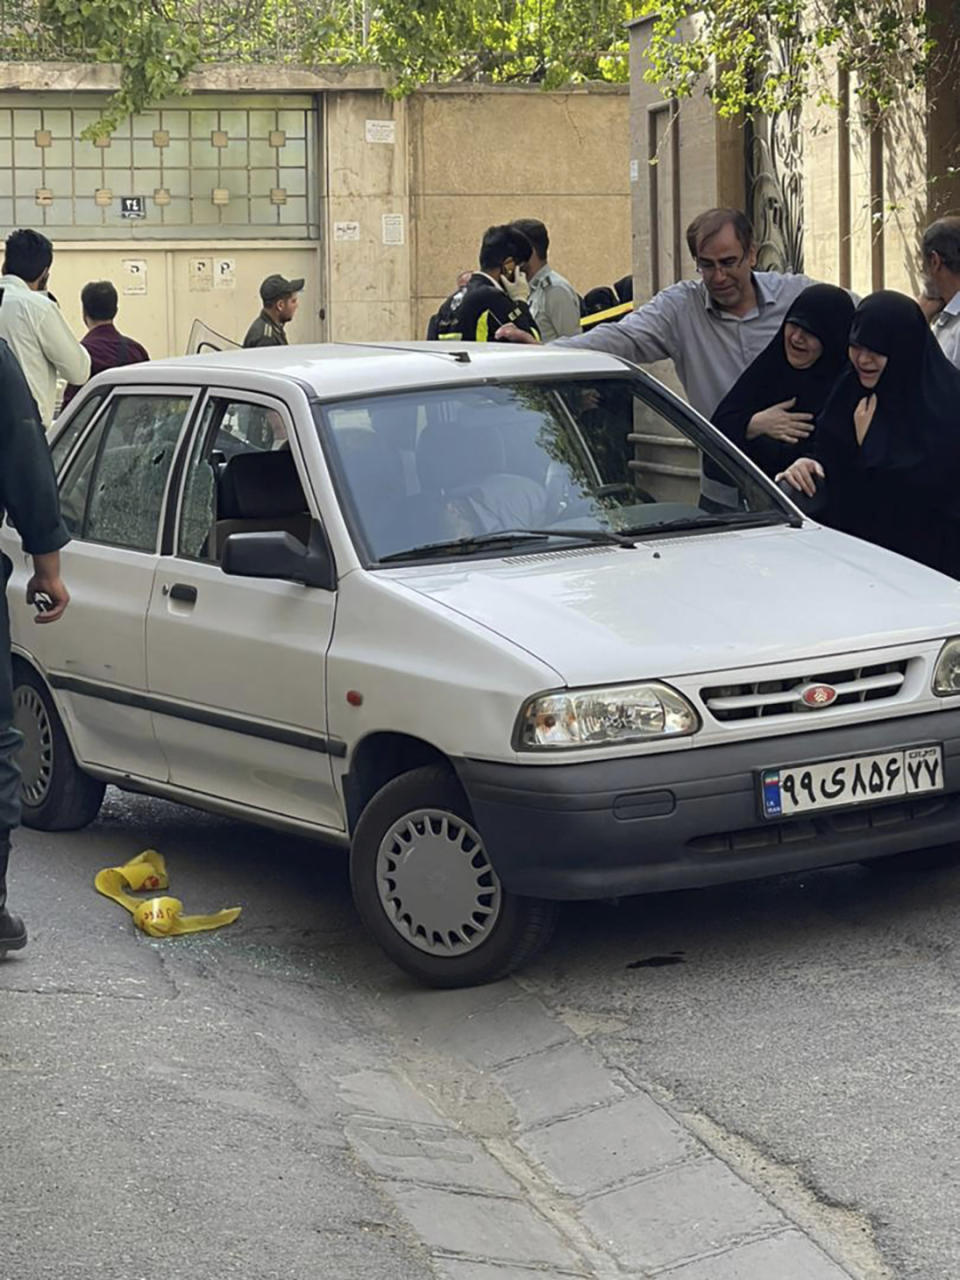 In this photo provided by Islamic Republic News Agency, IRNA, family members of Col. Hassan Sayyad Khodaei weep over his body at his car after being shot by two assailants in Tehran, Iran, Sunday, May 22, 2022. Hassan Sayyad Khodaei, a senior member of Iran's powerful Revolutionary Guard, was killed outside his home in Tehran on Sunday by unidentified gunmen on a motorbike, state TV reported. (IRNA via AP)